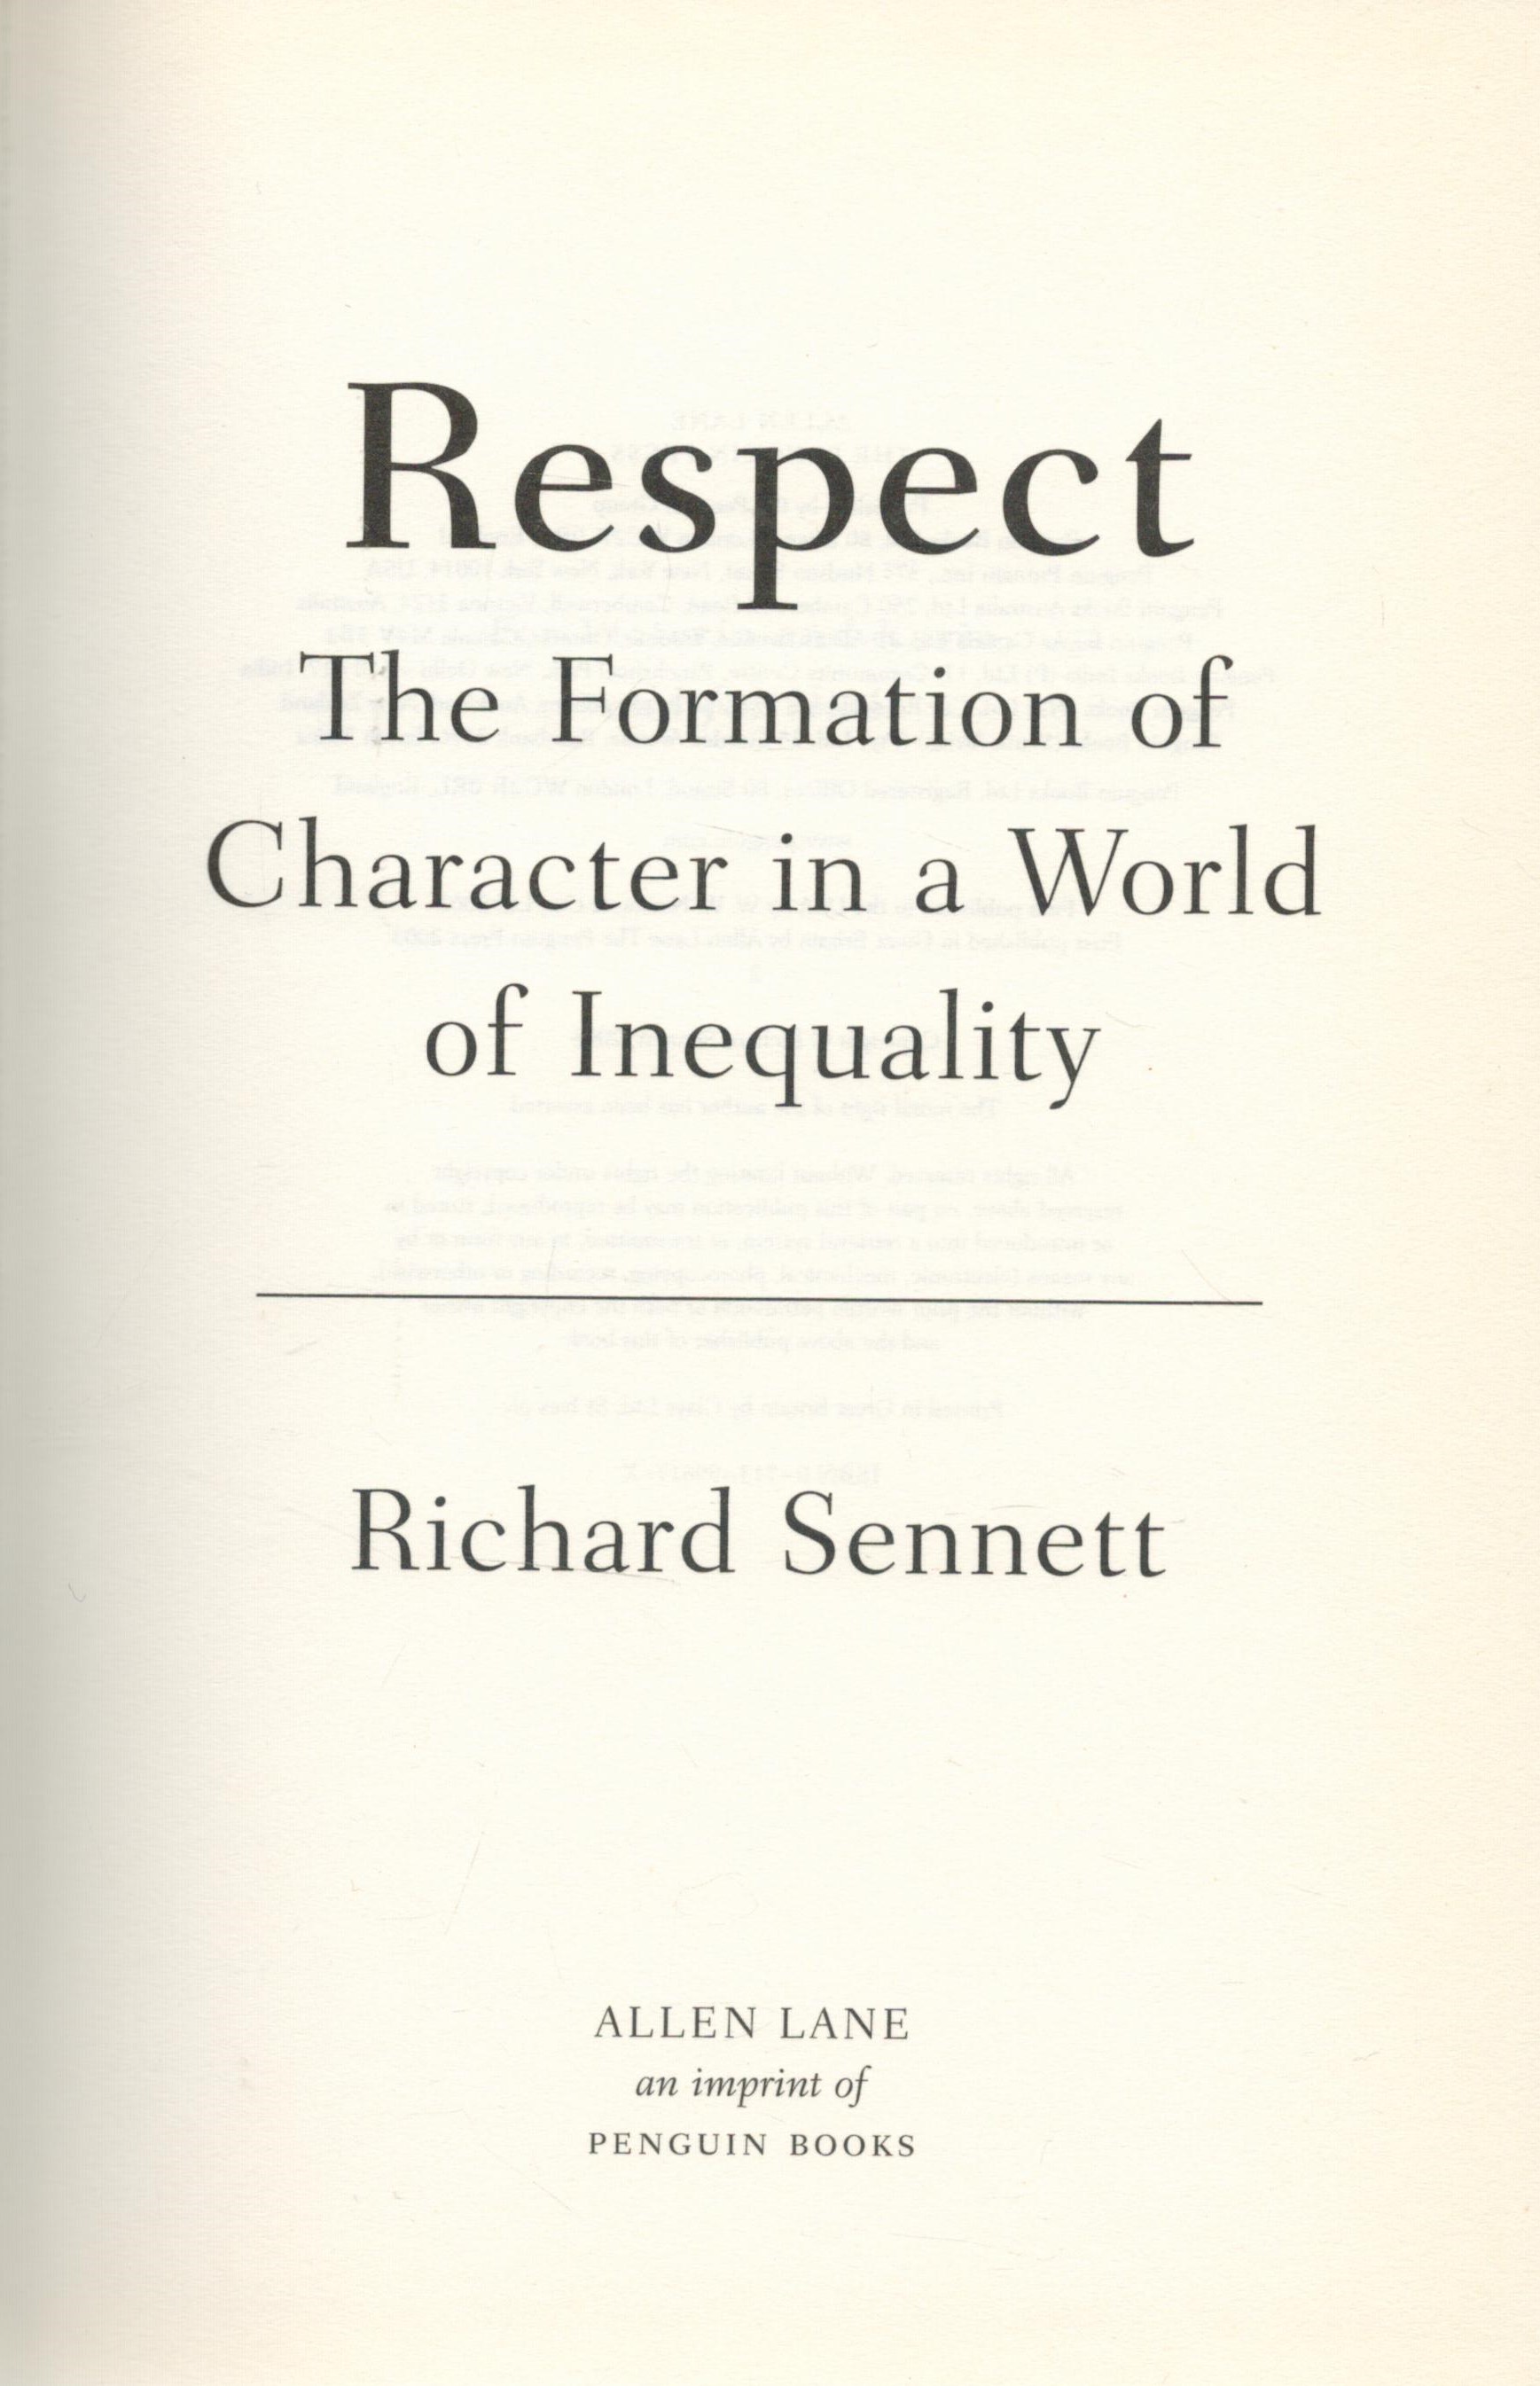 Respect The Formation of Character in an Age of Inequality by Richard Sennett 2003 First Edition - Image 2 of 3